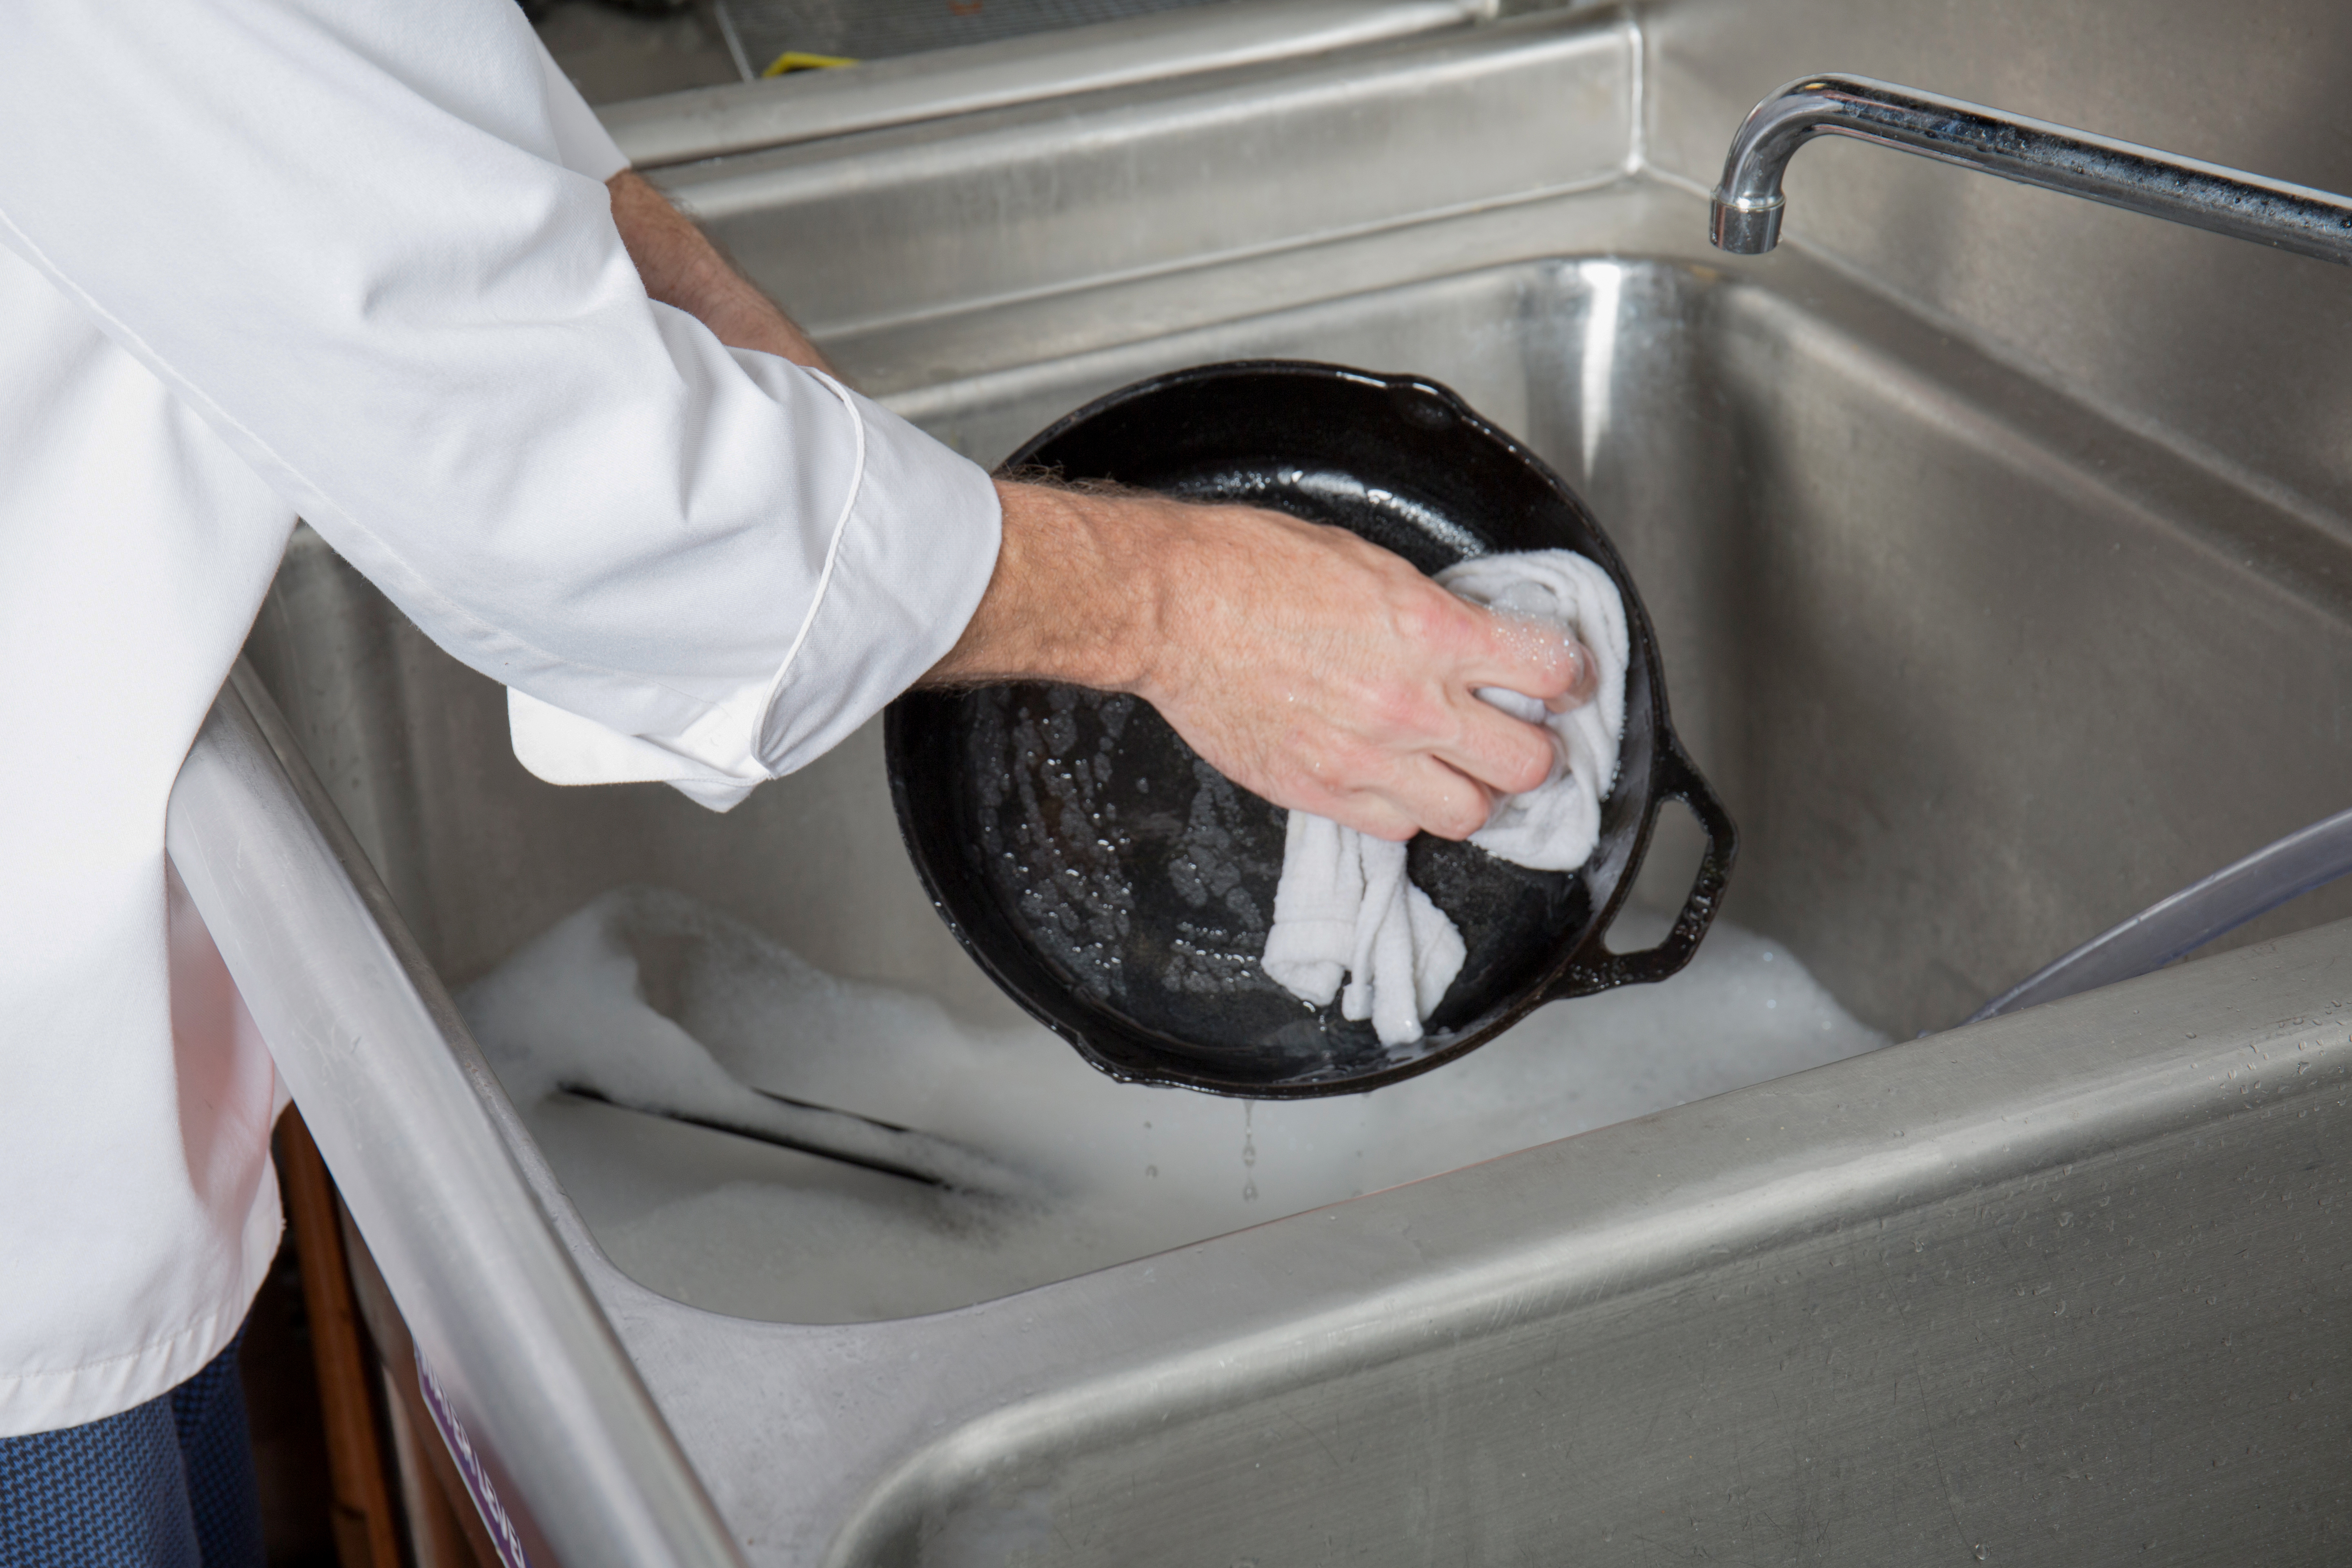 Chef washing a cast iron skillet in sink with soapy water and wash cloth